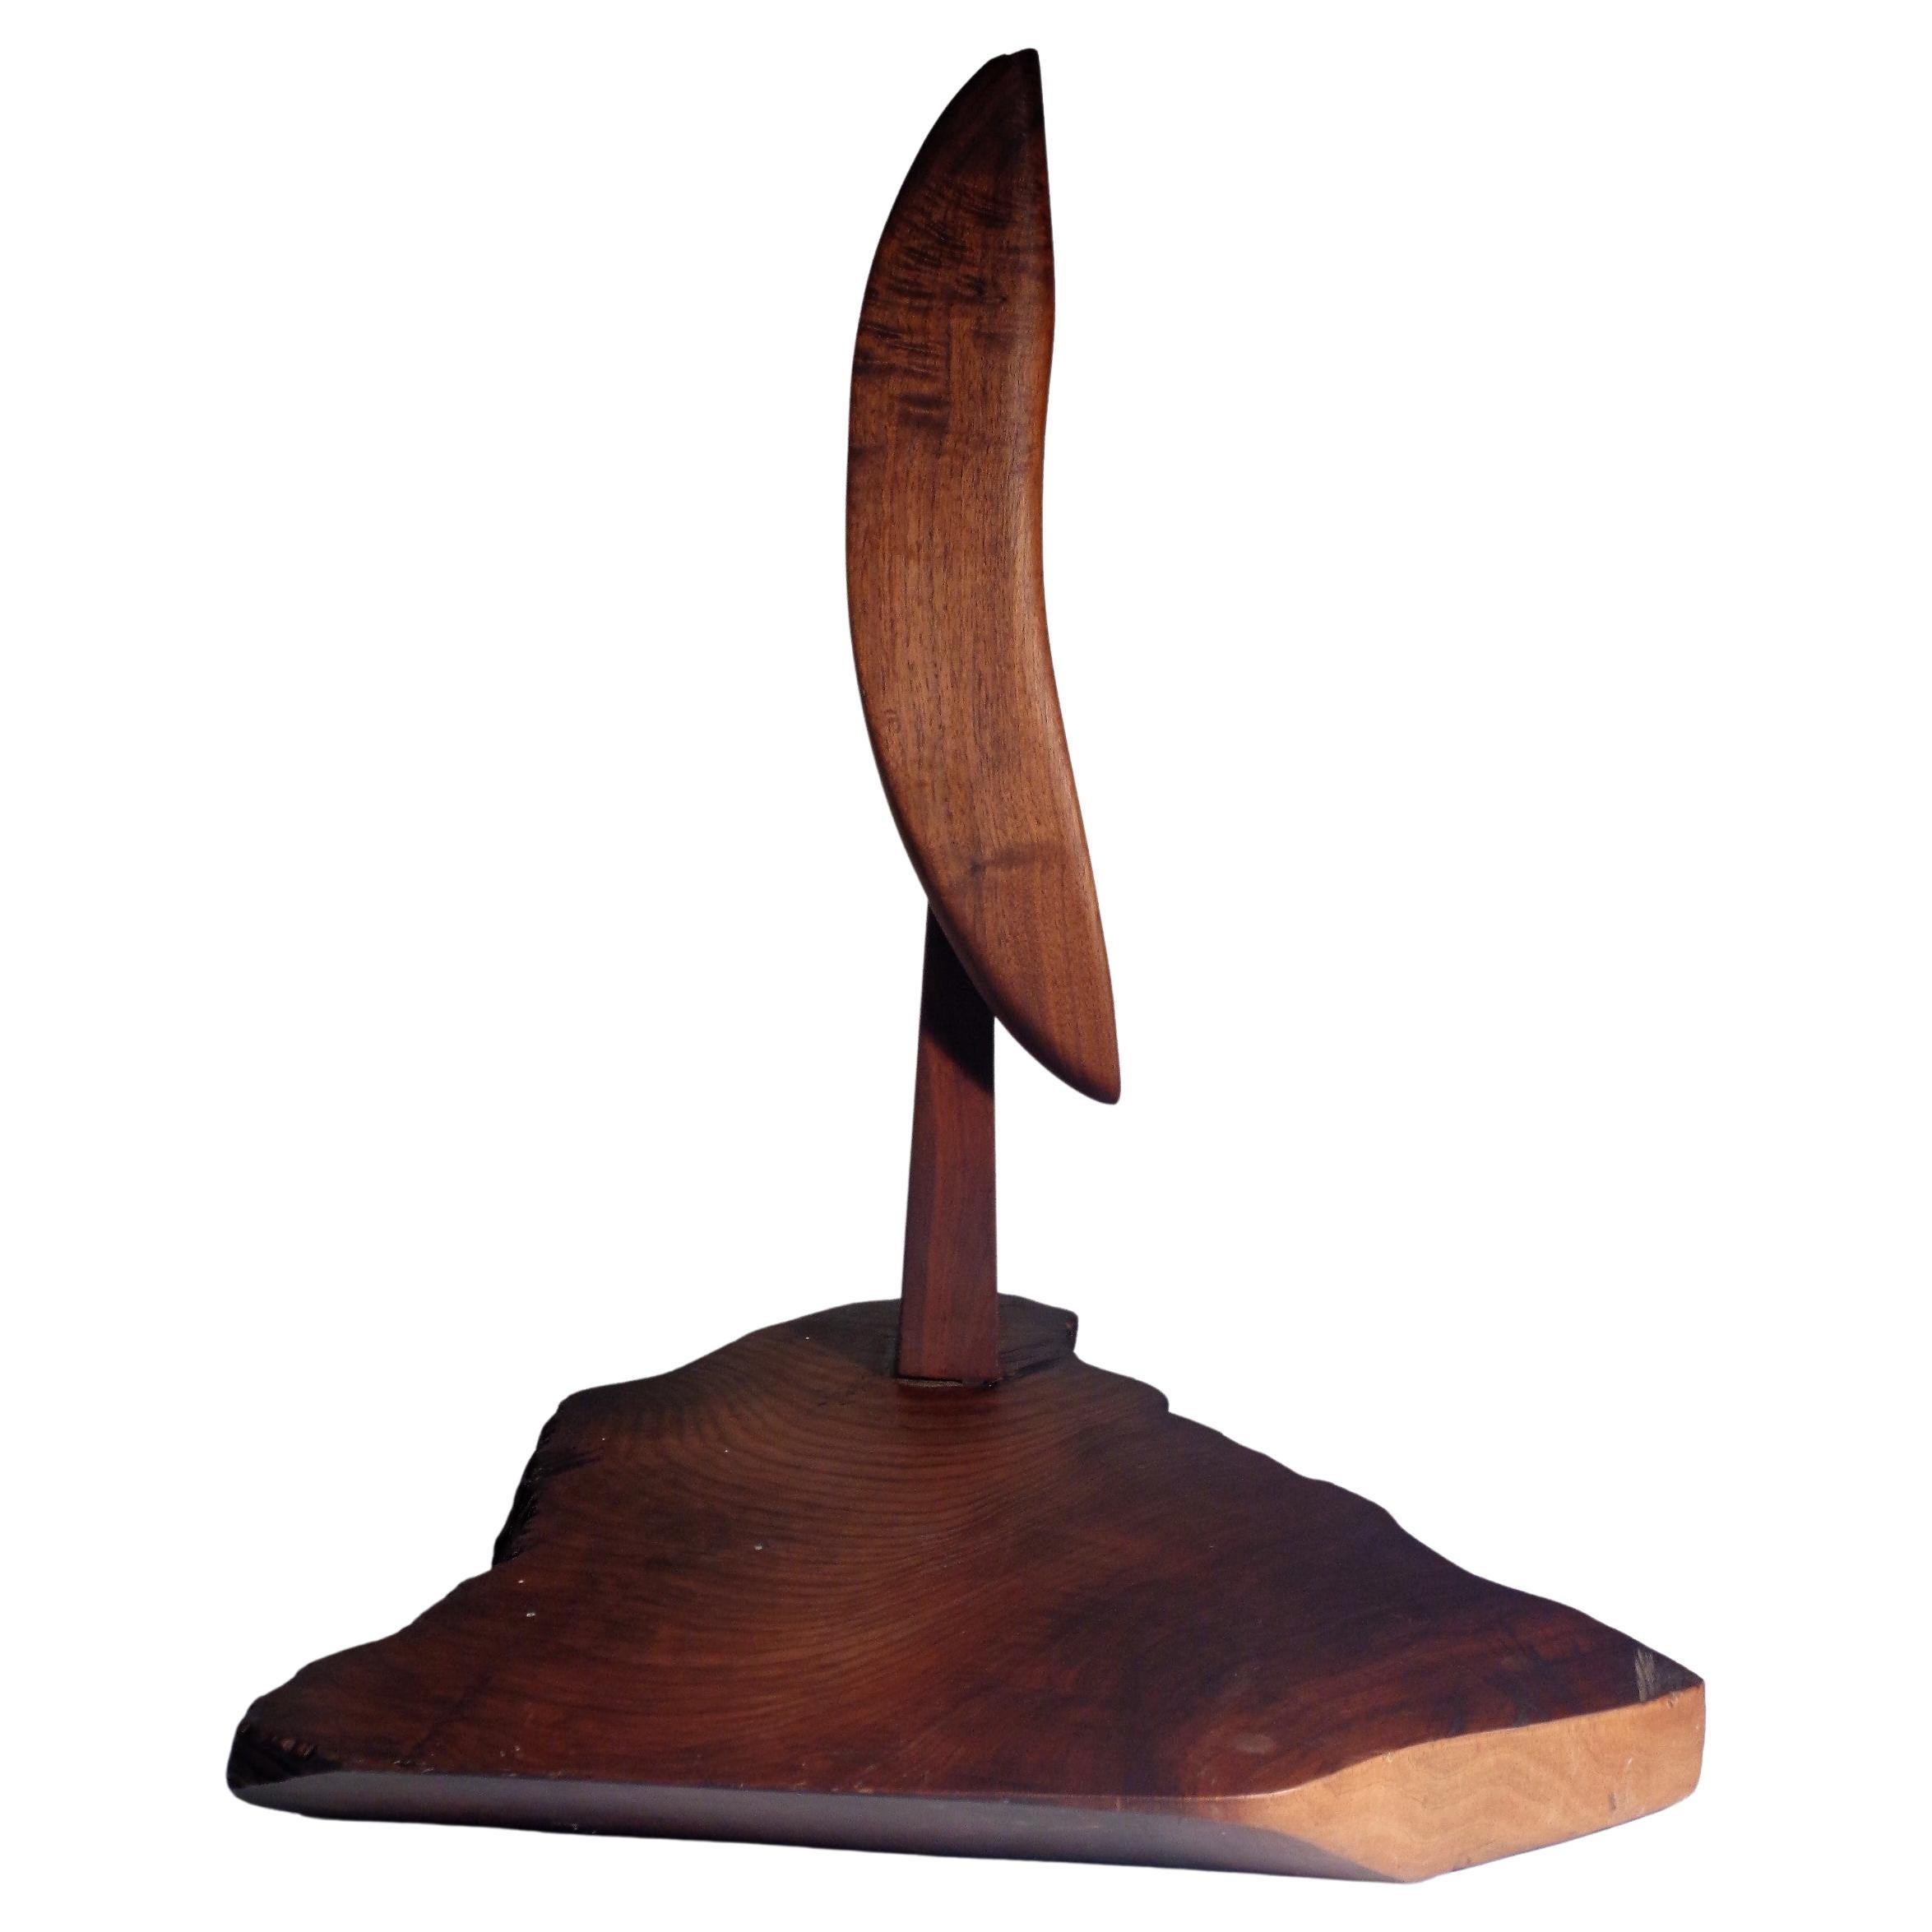 Hand-Carved American Studio Craft Movement Modernist Abstract Wood Sculpture, 1970-1980 For Sale